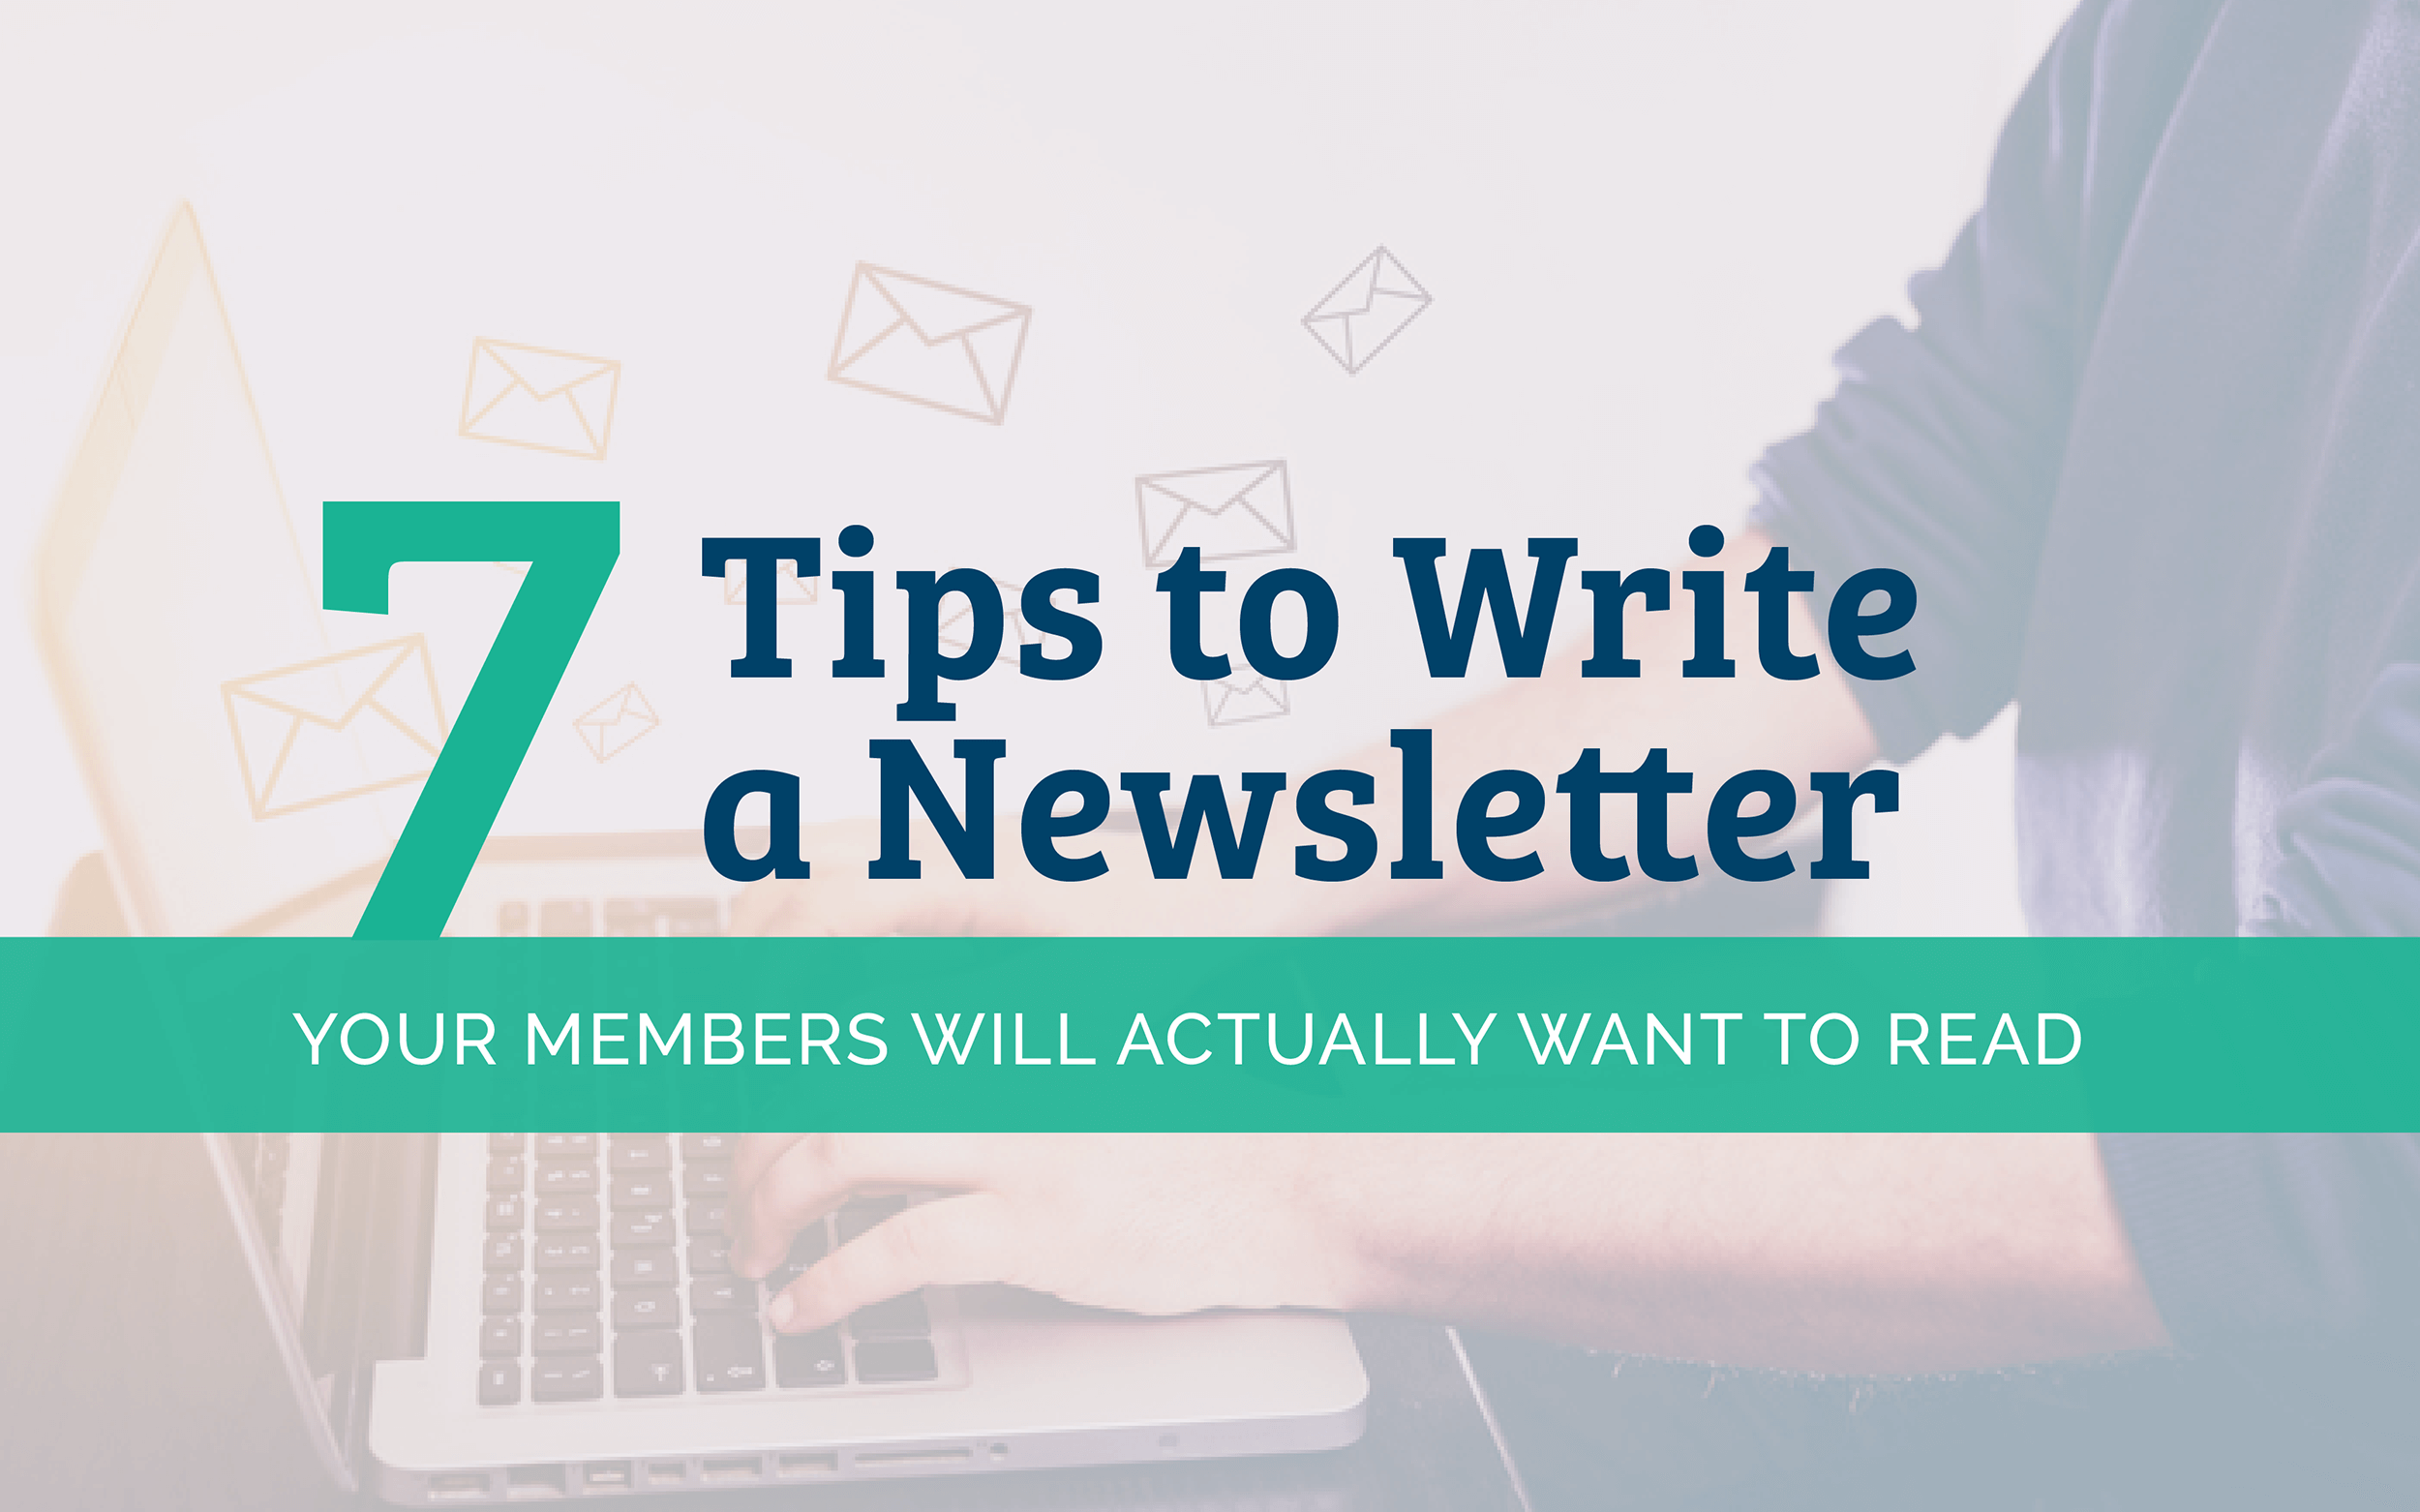 22 Tips to Write a Newsletter Your Members Will Actually Want to Read